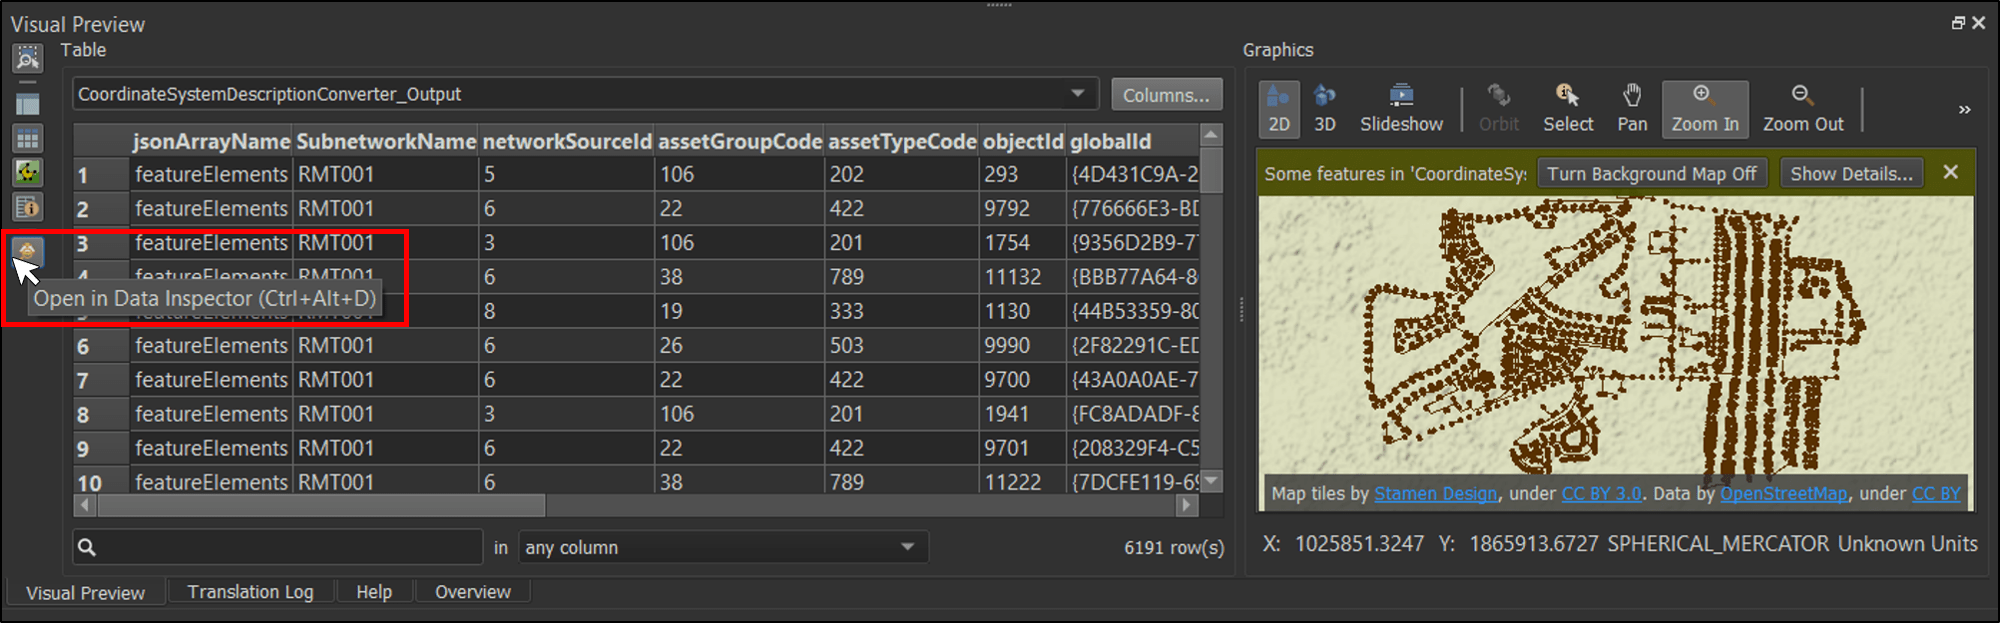 Visual preview of featureElements table in Workbench